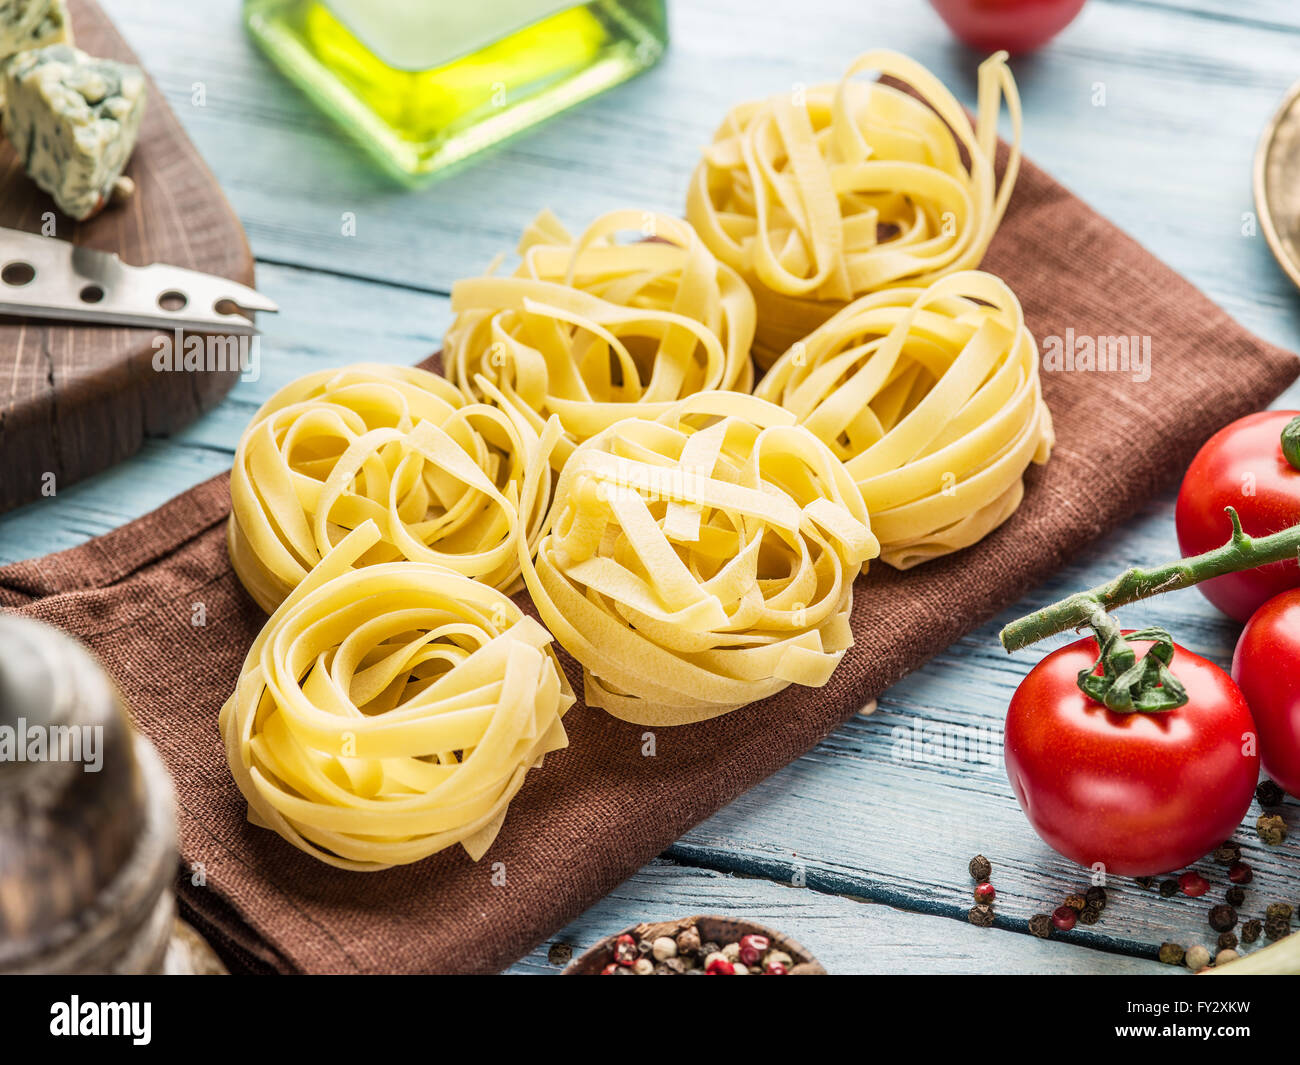 Pasta ingredients. Cherry-tomatoes, spaghetti pasta and spices on the wooden table. Stock Photo